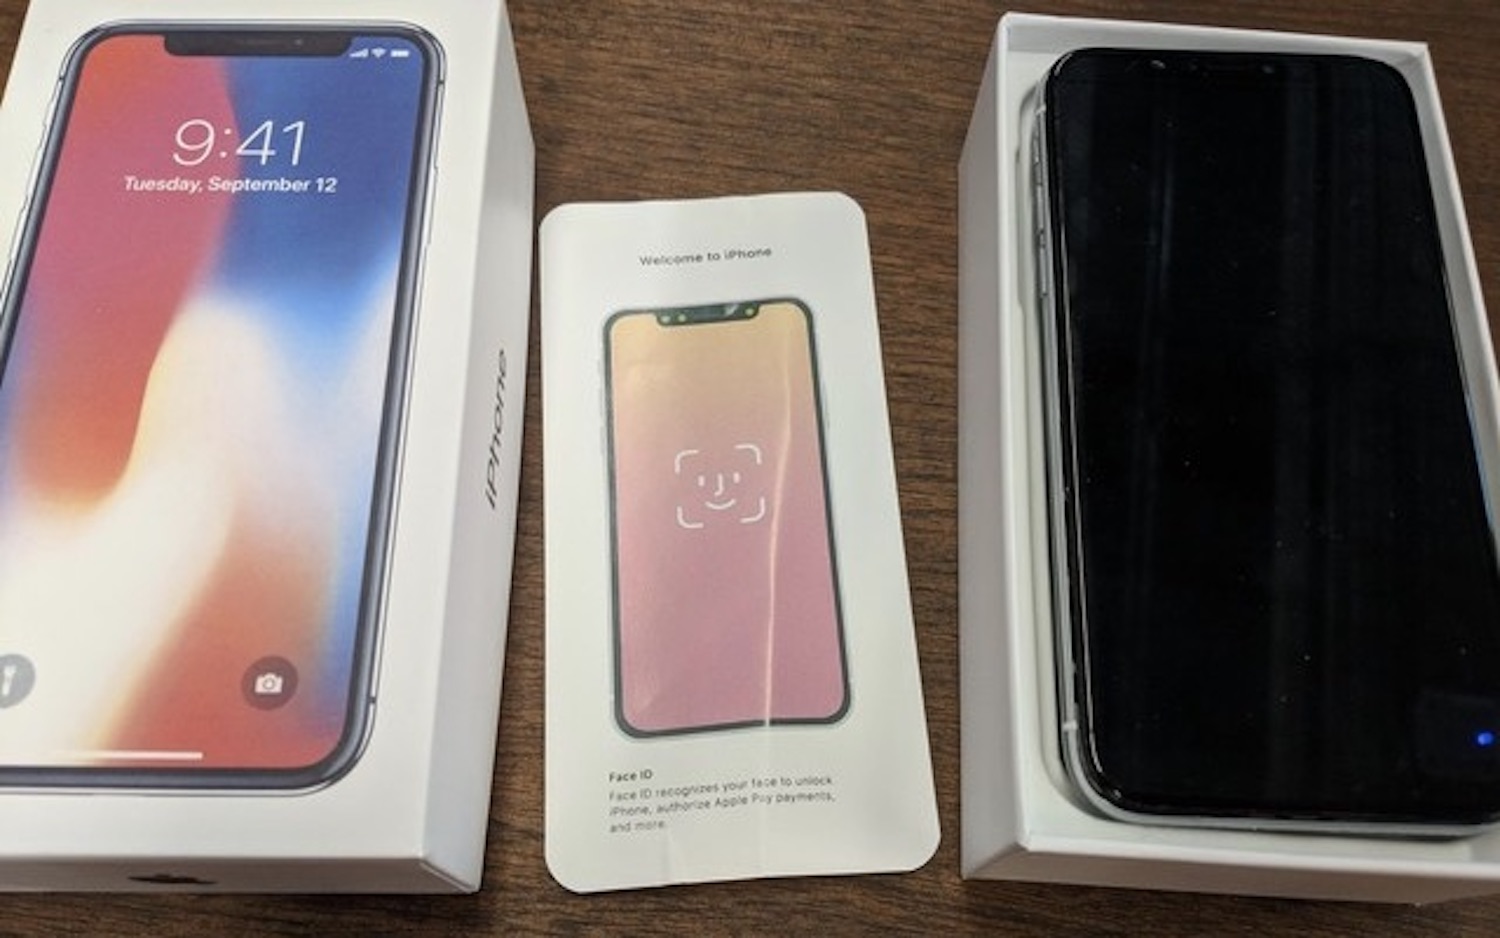 Review goes hands-on w/ a fake $100 iPhone X & the grave security